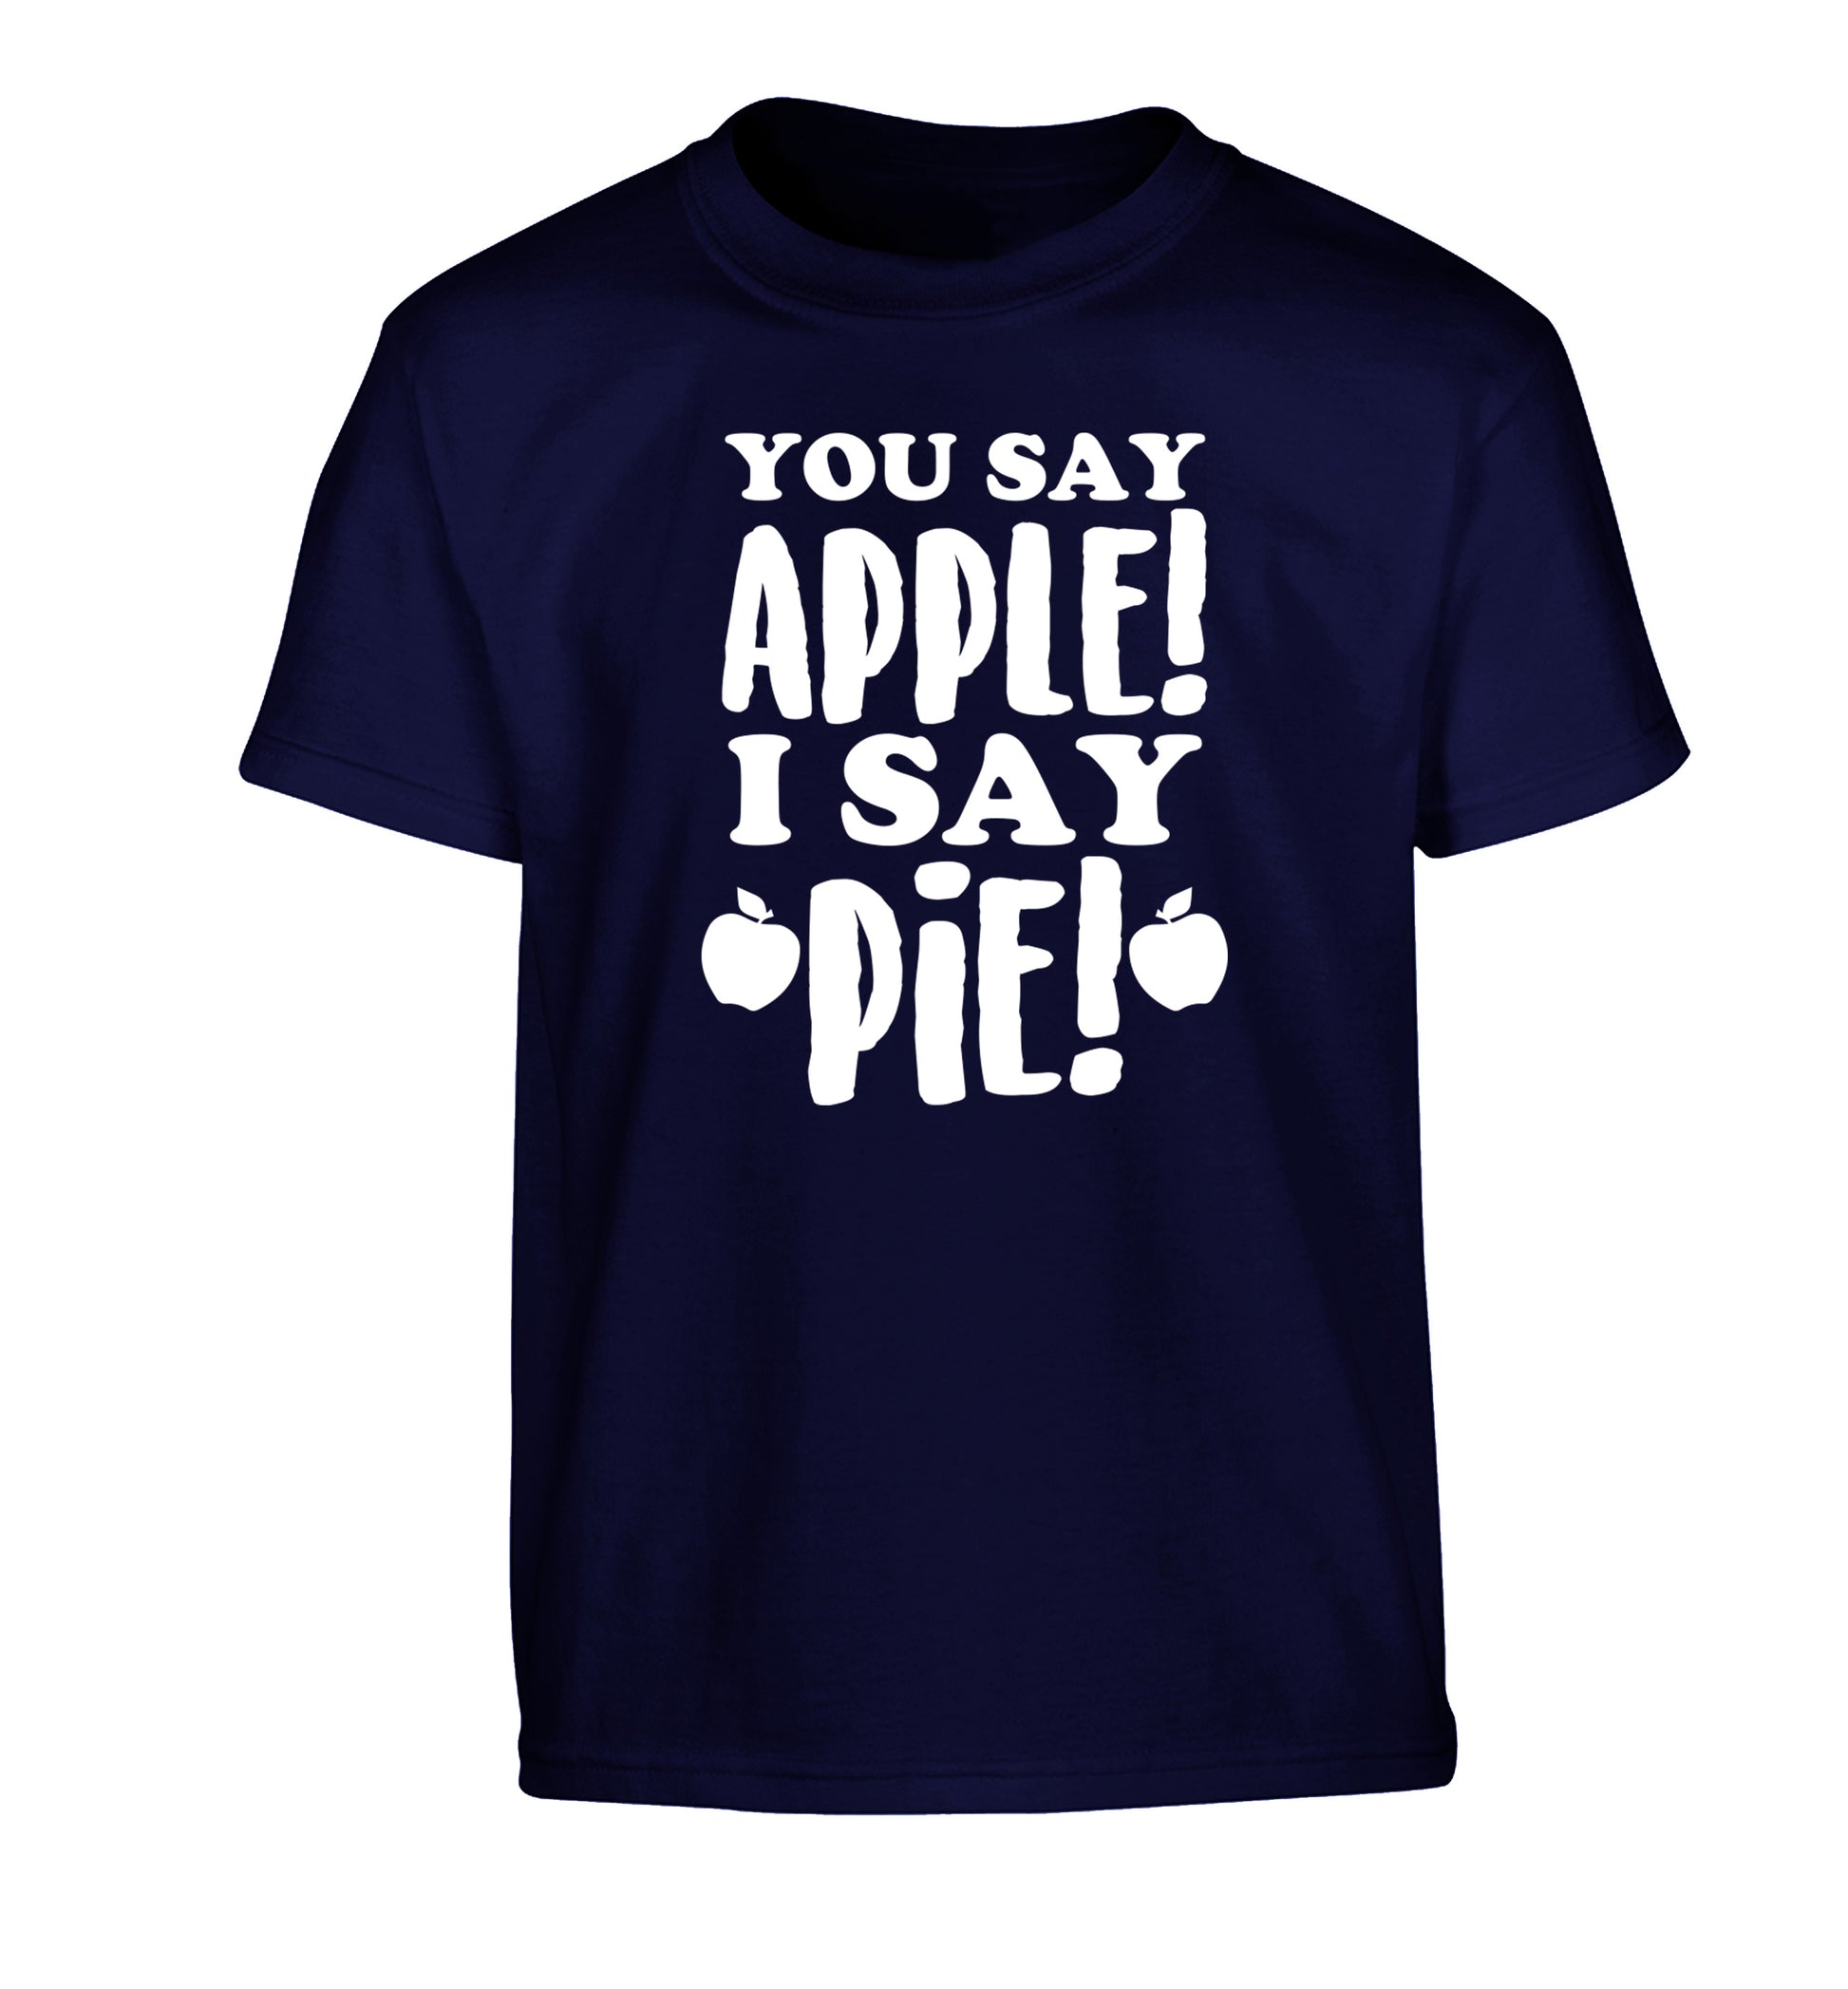 You say apple I say pie! Children's navy Tshirt 12-14 Years